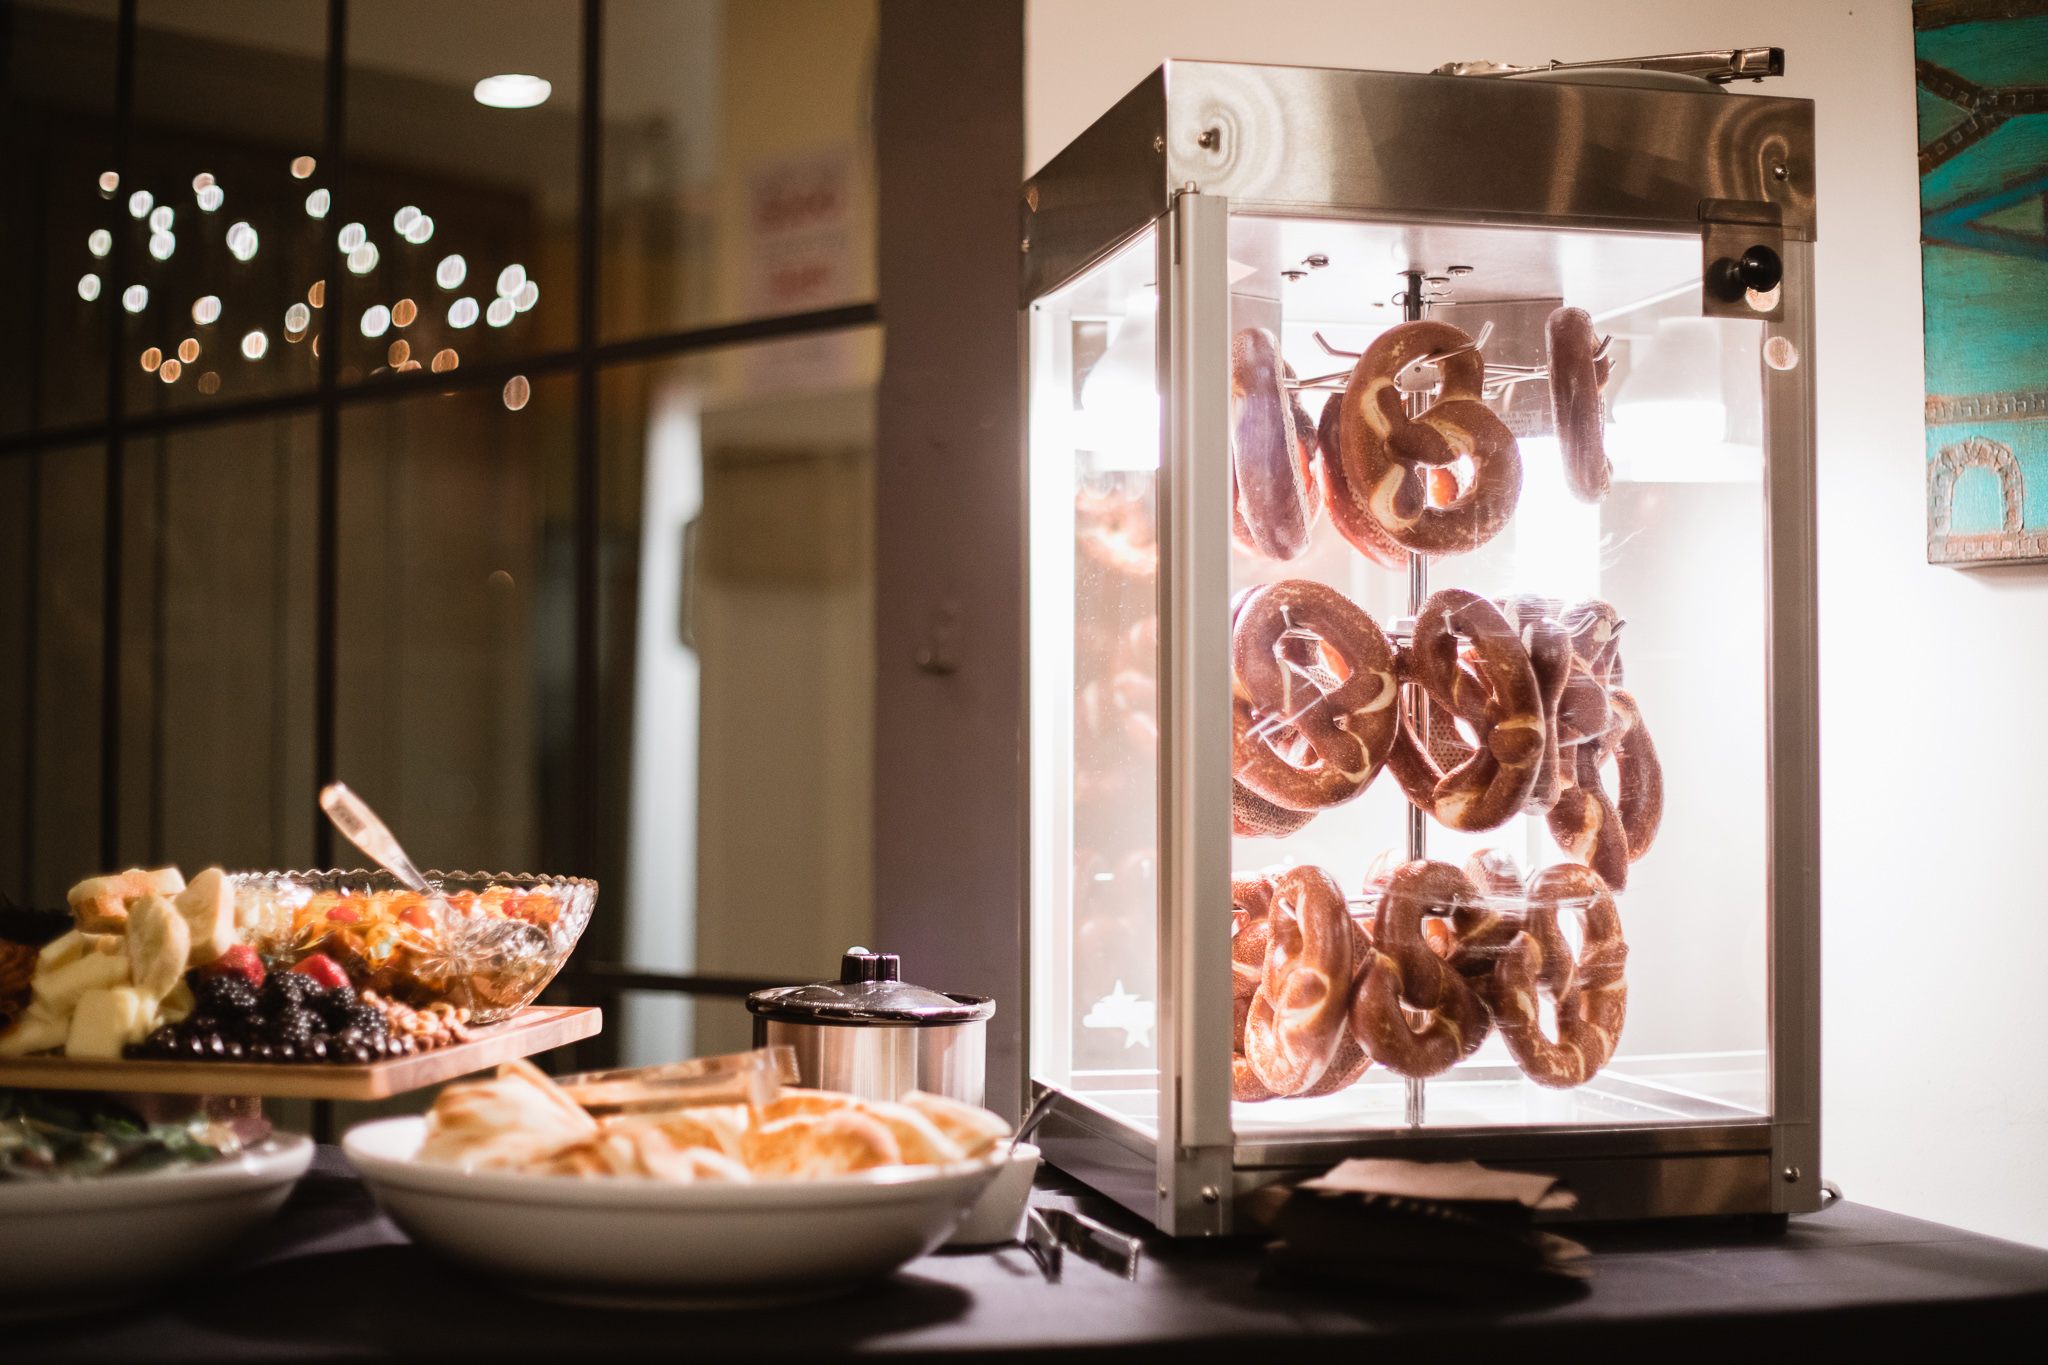 Hors d'oeuvres at a wedding reception with fresh pretzels in a pretzel warmer.